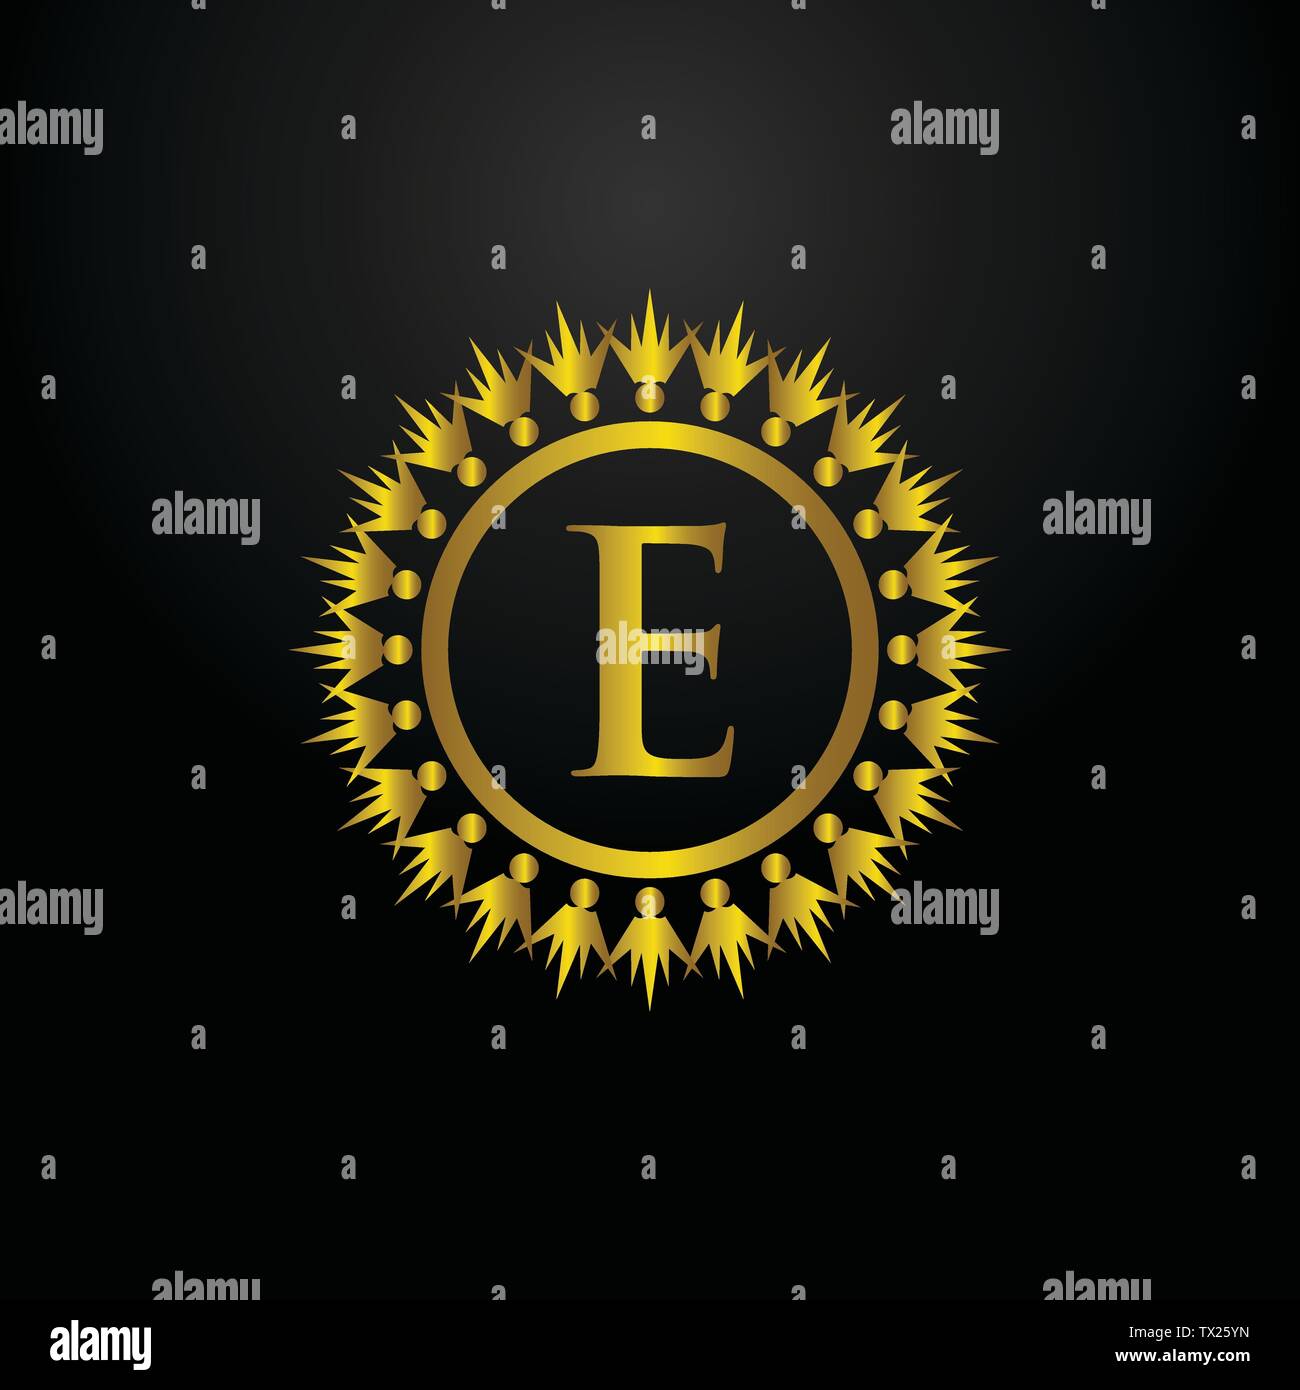 Letter e fast speed logo Royalty Free Vector Image